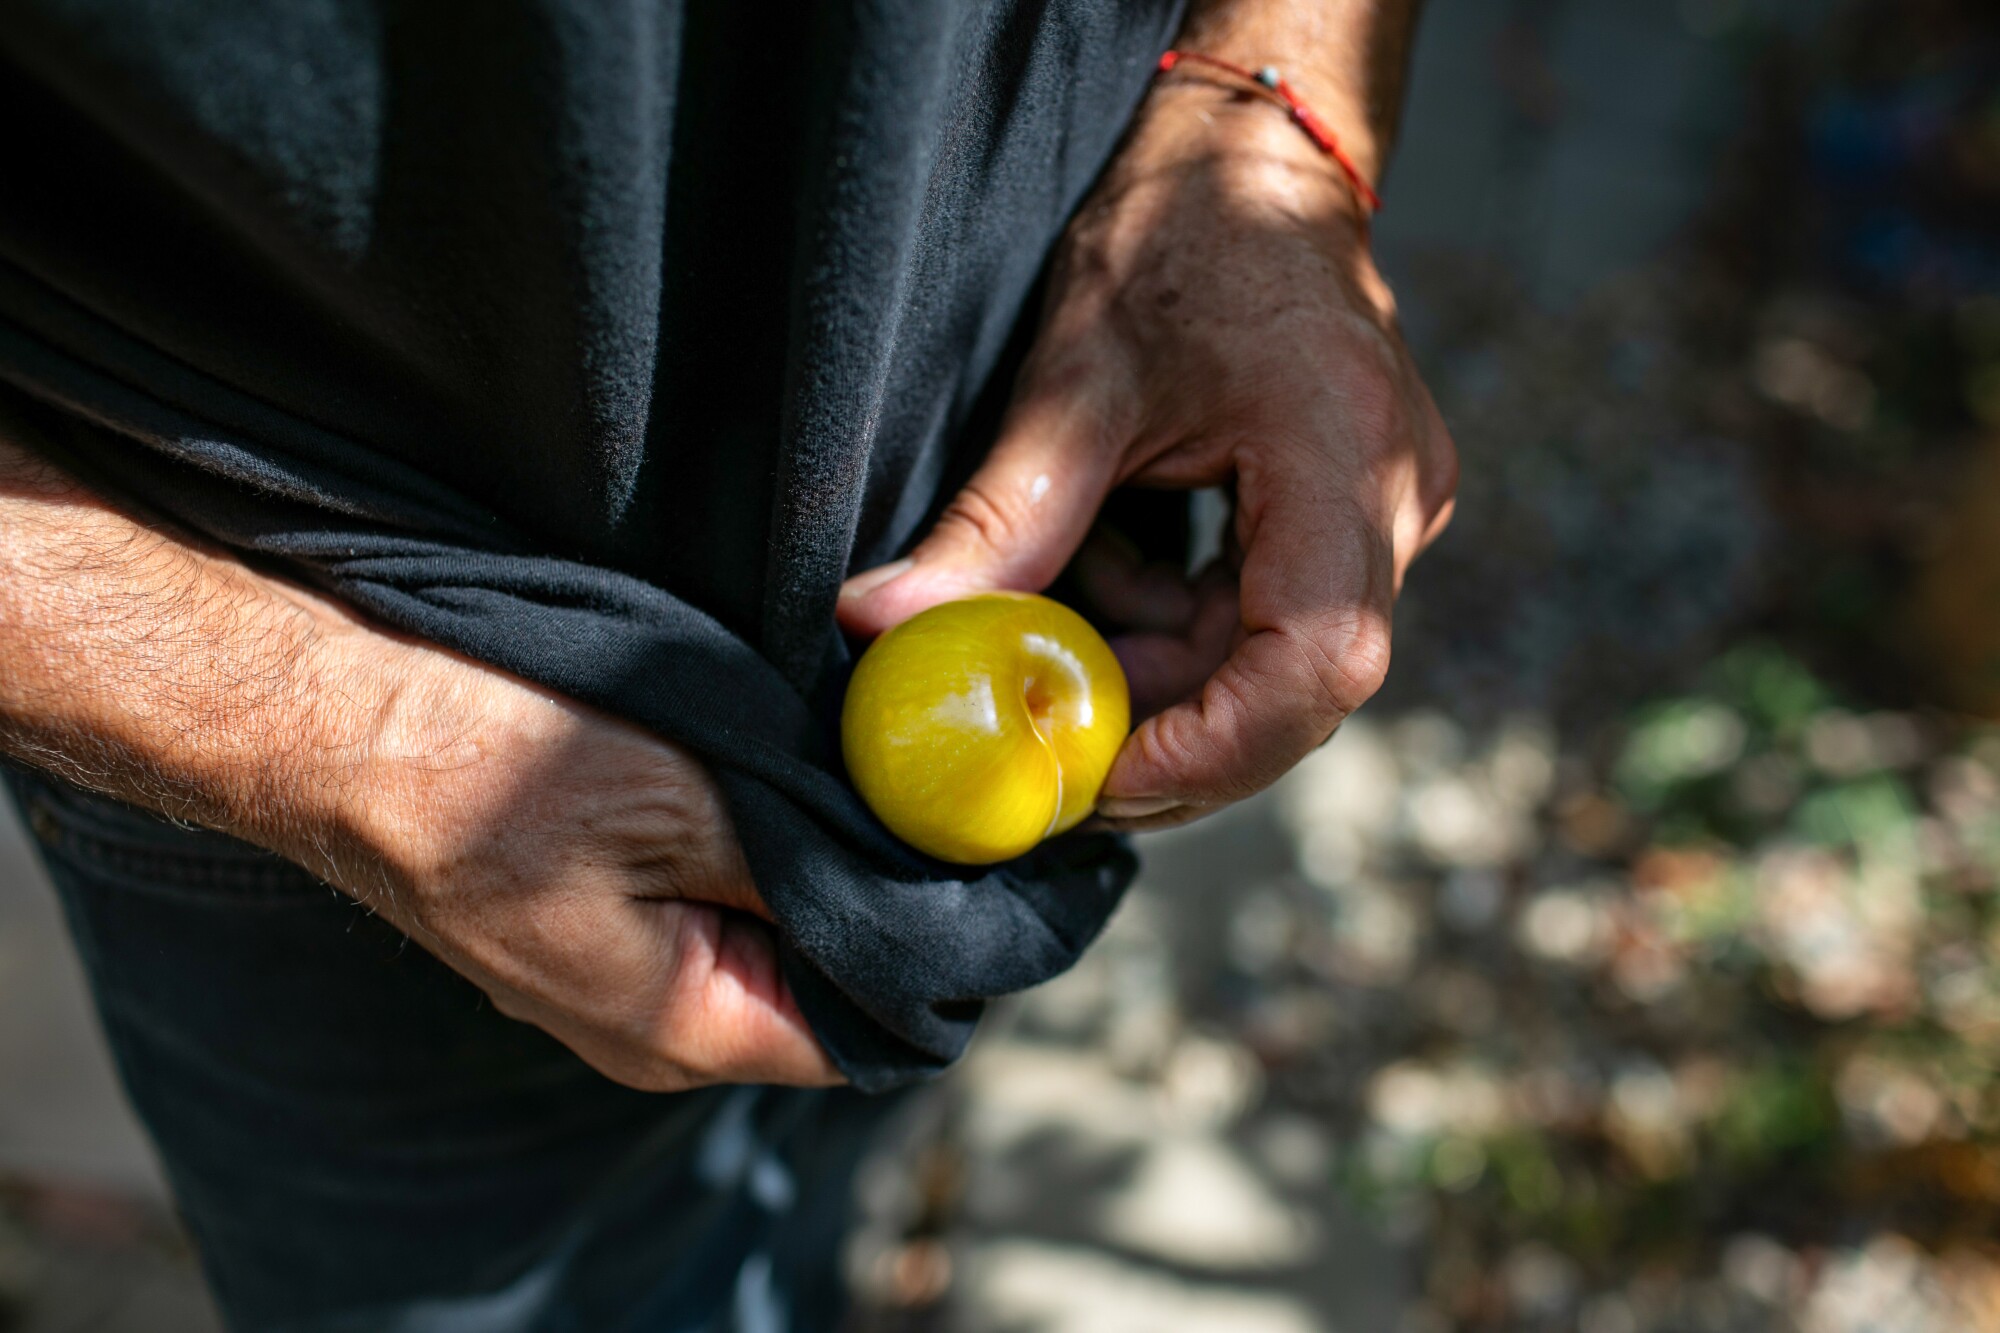 A man uses his shirt to wipe off a freshly picked pluot.